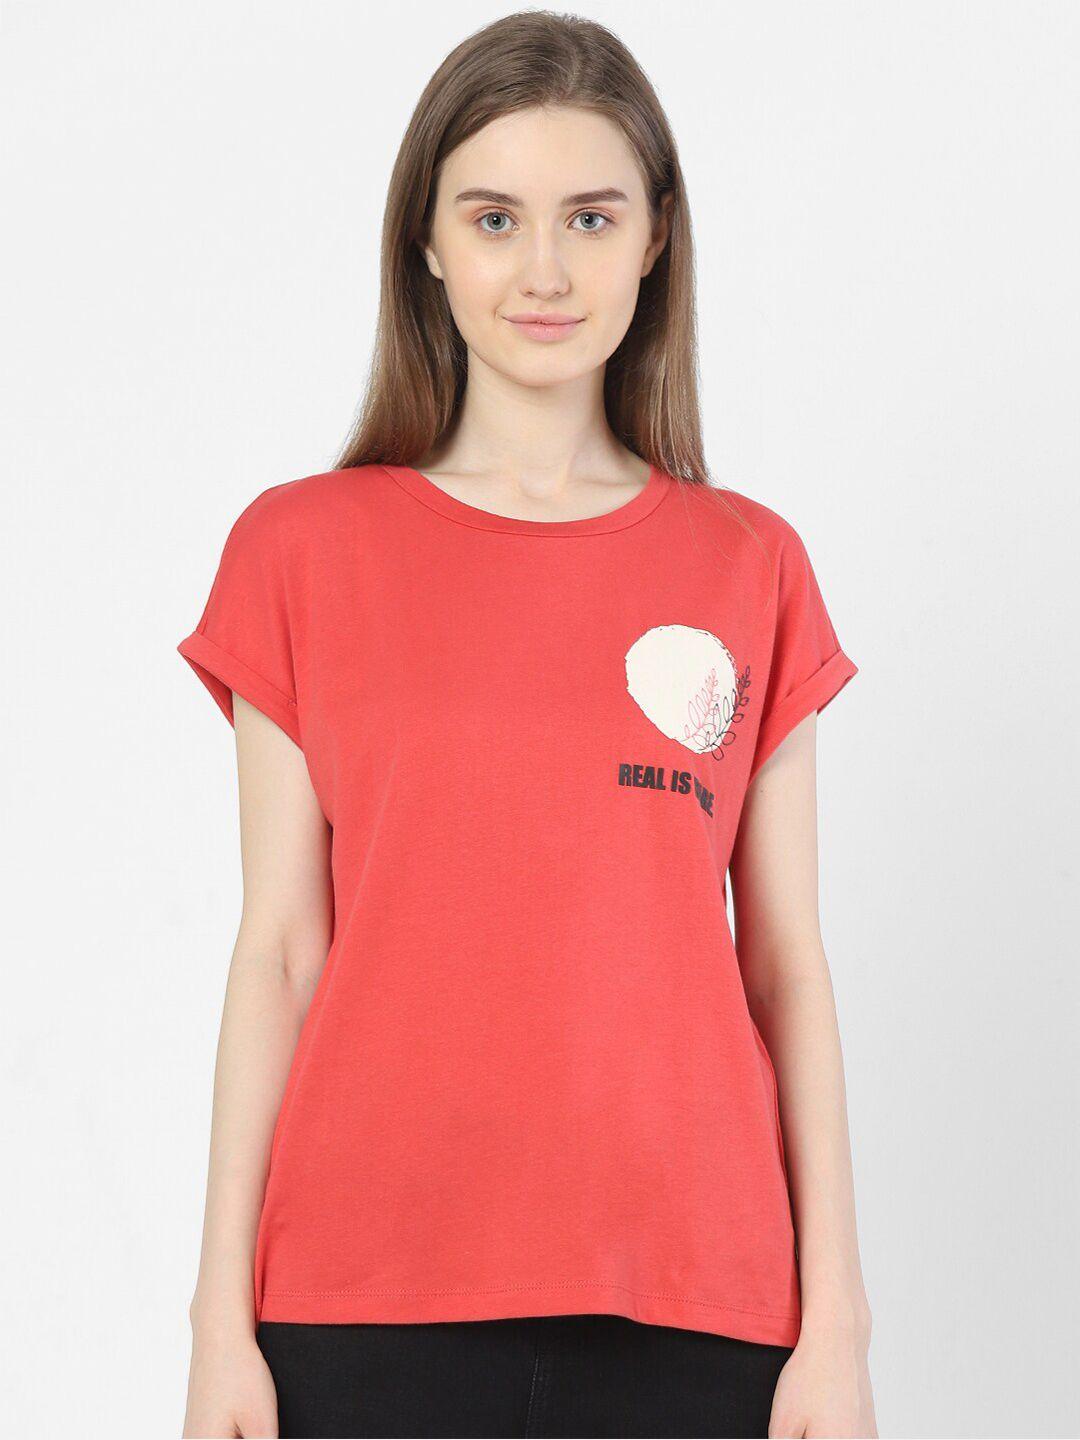 vero moda women red typography printed extended sleeves t-shirt